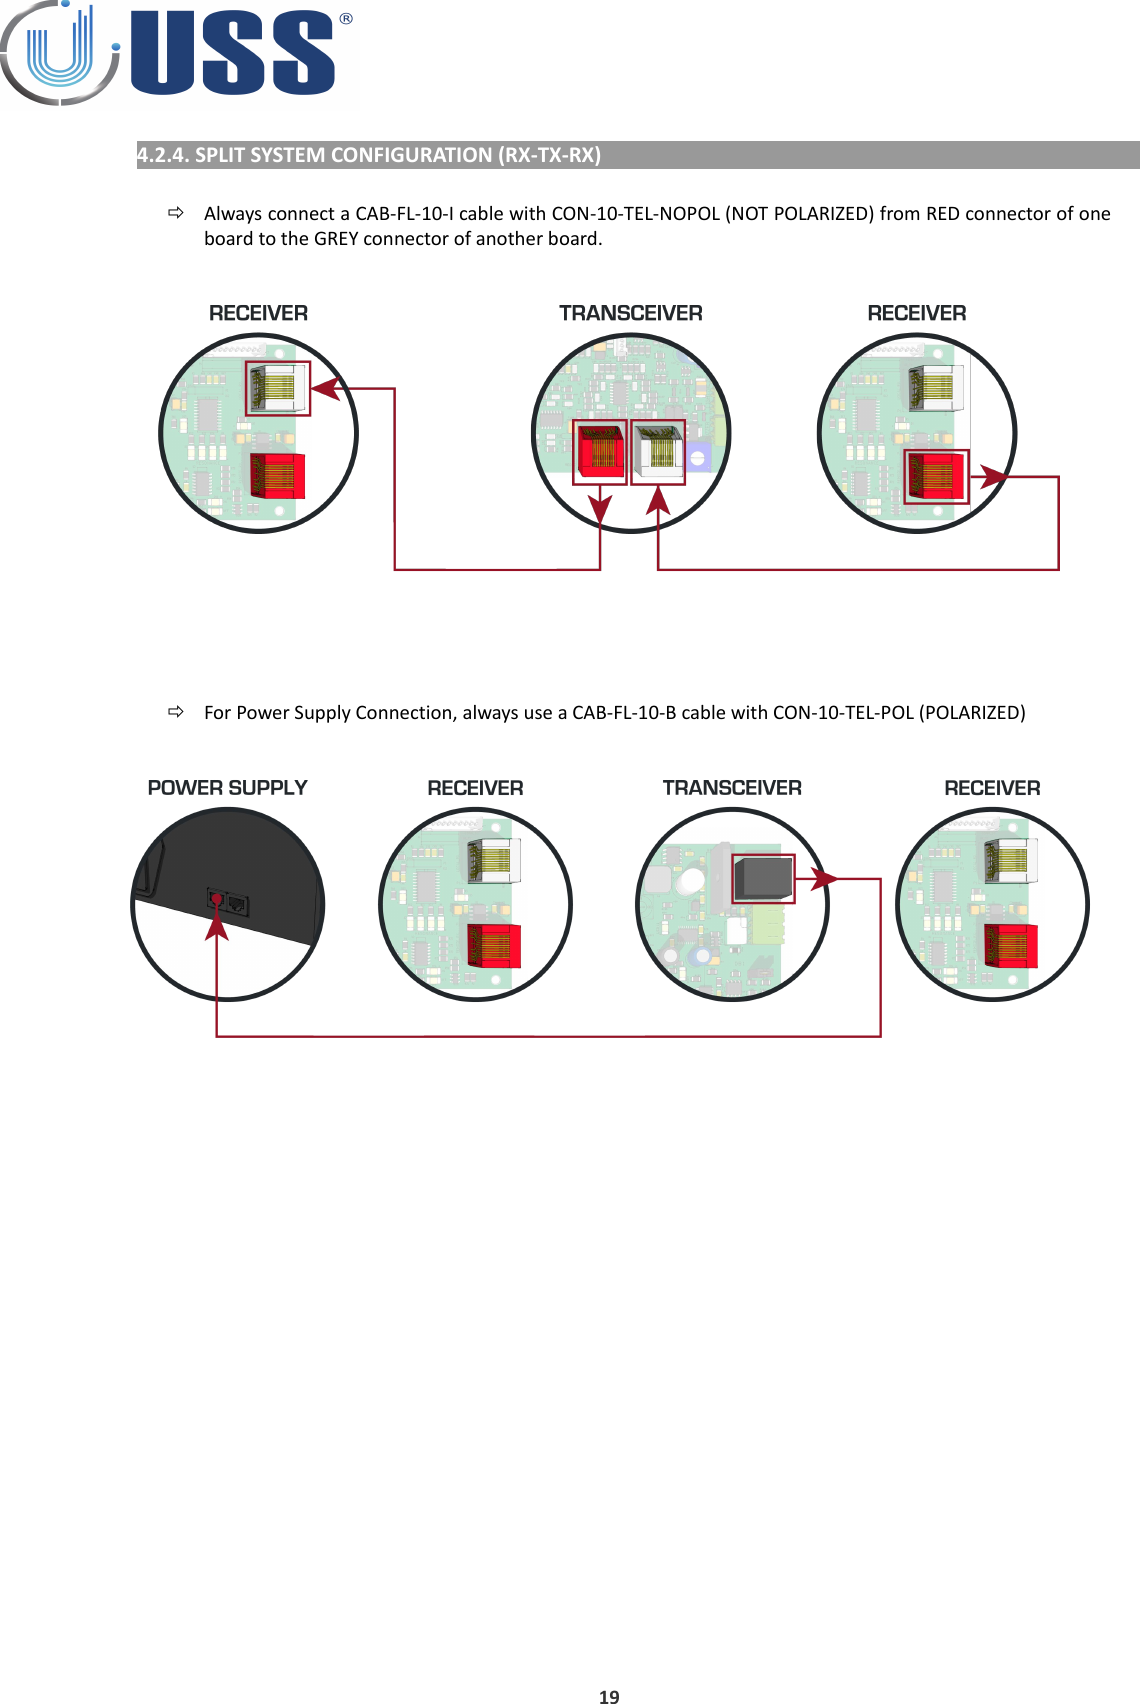 4.2.4. SPLIT SYSTEM CONFIGURATION (RX-TX-RX)Always connect a CAB-FL-10-I cable with CON-10-TEL-NOPOL (NOT POLARIZED) from RED connector of one board to the GREY connector of another board.For Power Supply Connection, always use a CAB-FL-10-B cable with CON-10-TEL-POL (POLARIZED)19